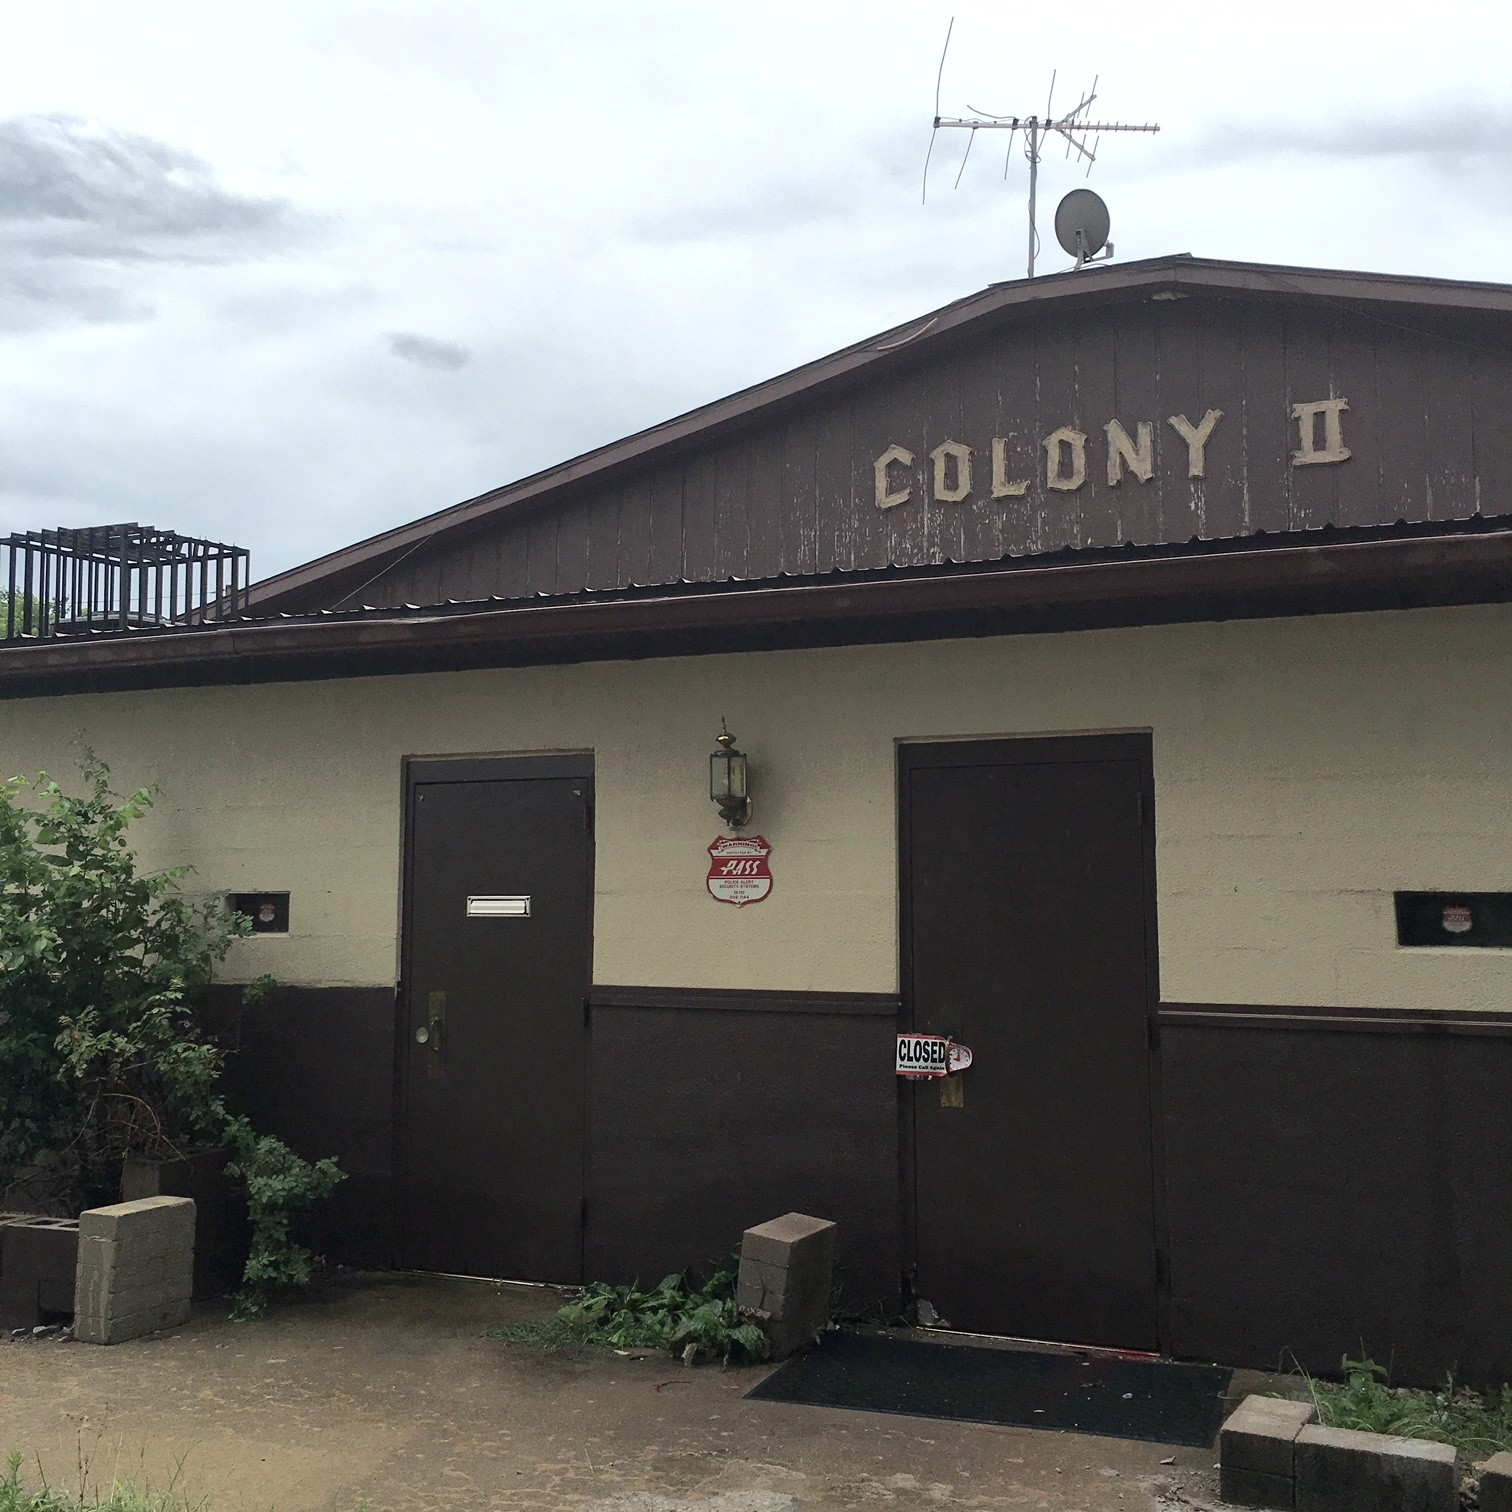 Goodbye to the Colony II, a Swinger/Adult Film Hub in 